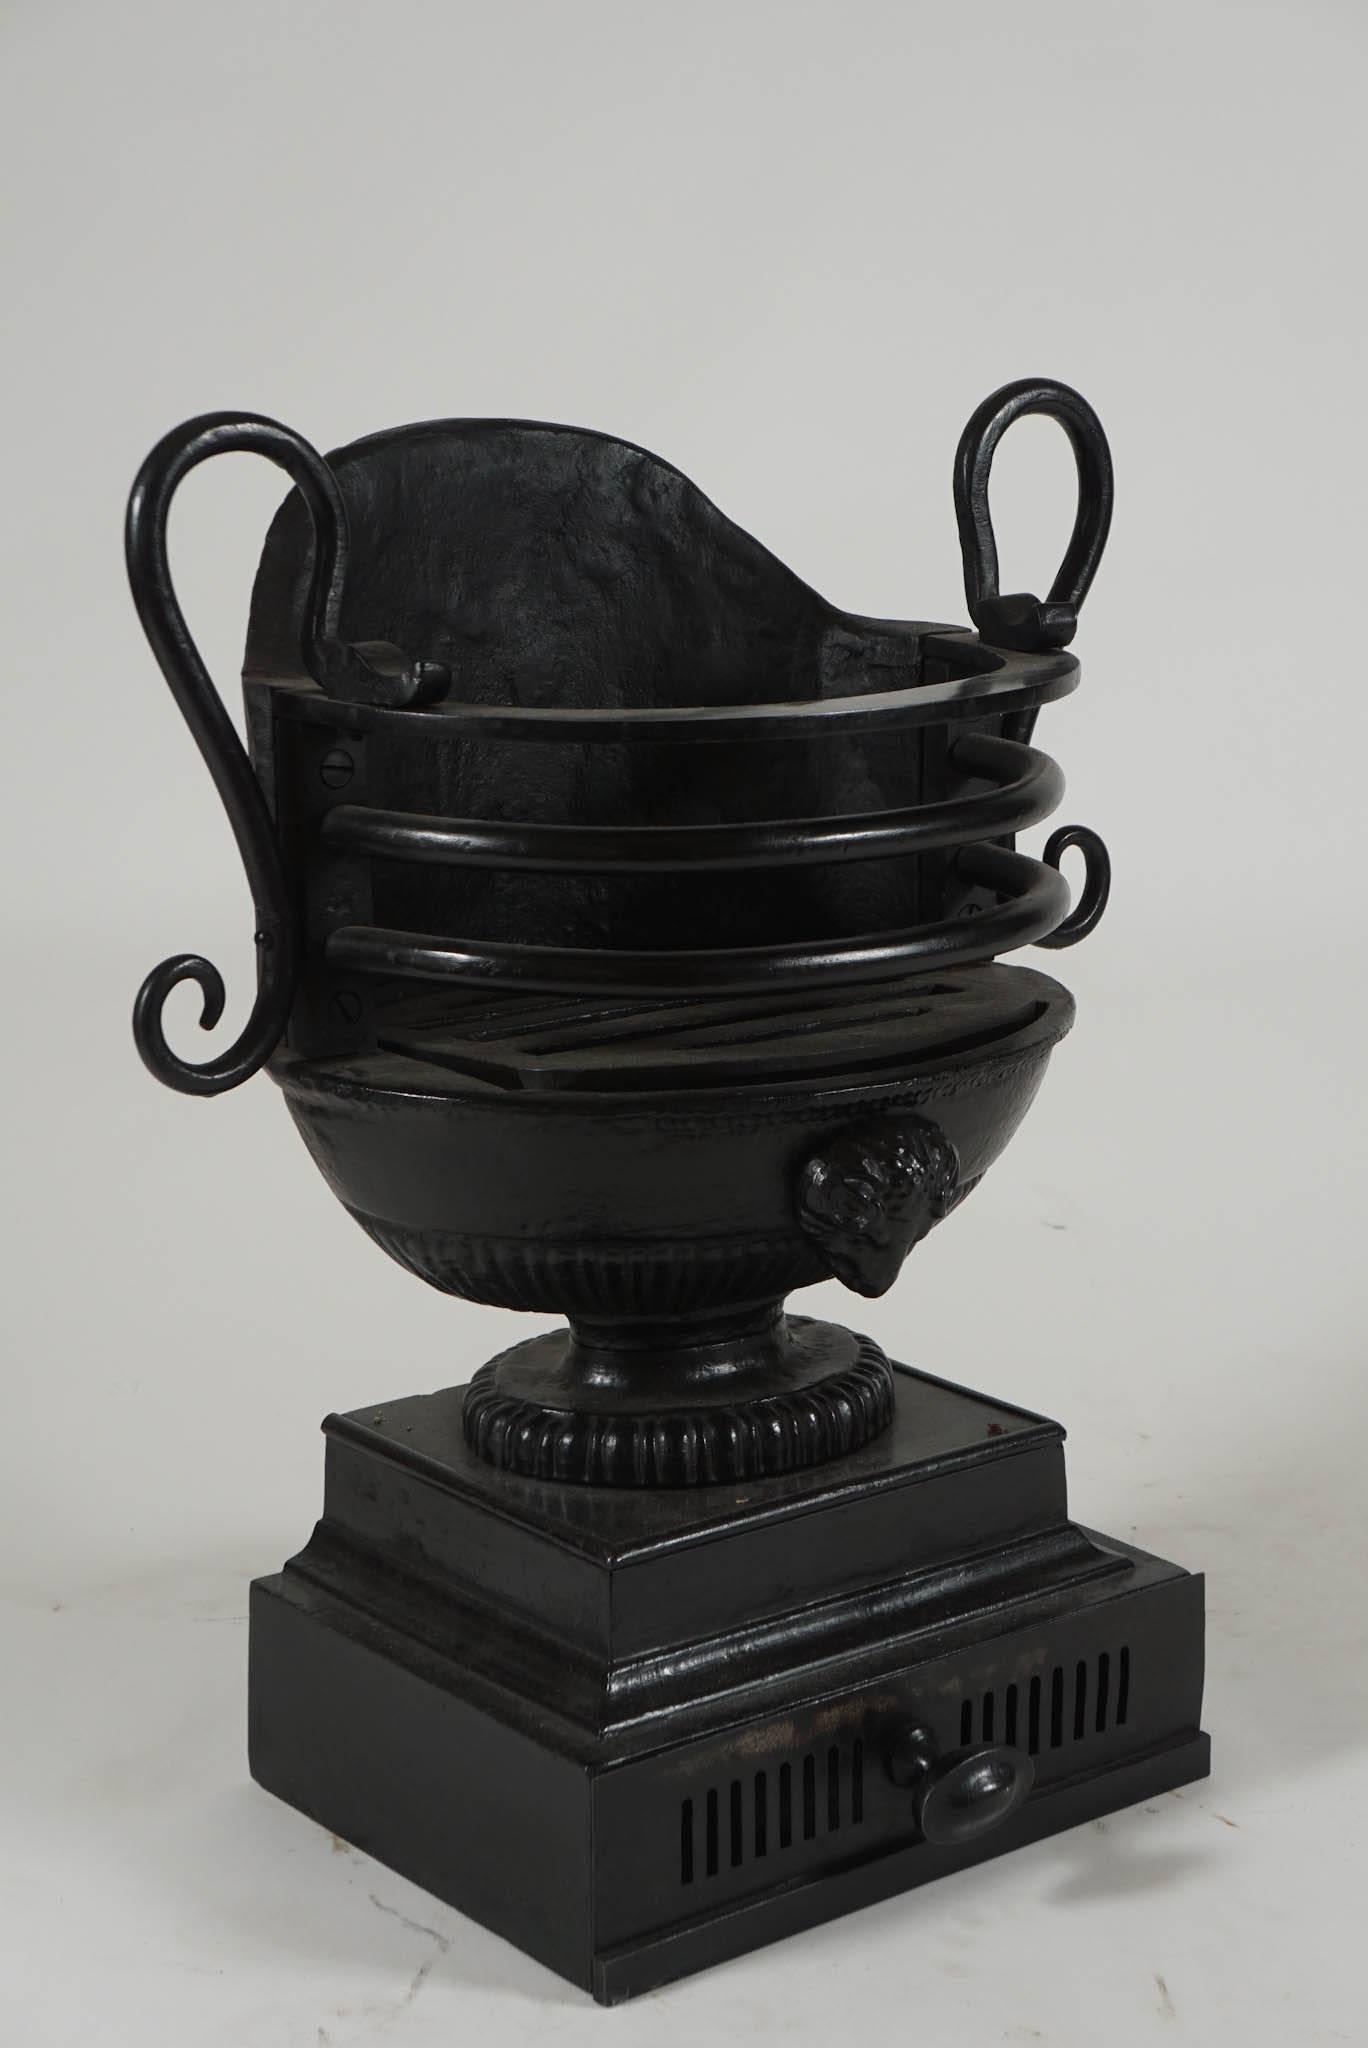 An elegant 19th-century English Regency style cast and wrought iron fireplace coal grate or basket of urn or trophy form having wrought handles either side of cast body with ram's head ornament on plinth with integral ash drawer and oval knob